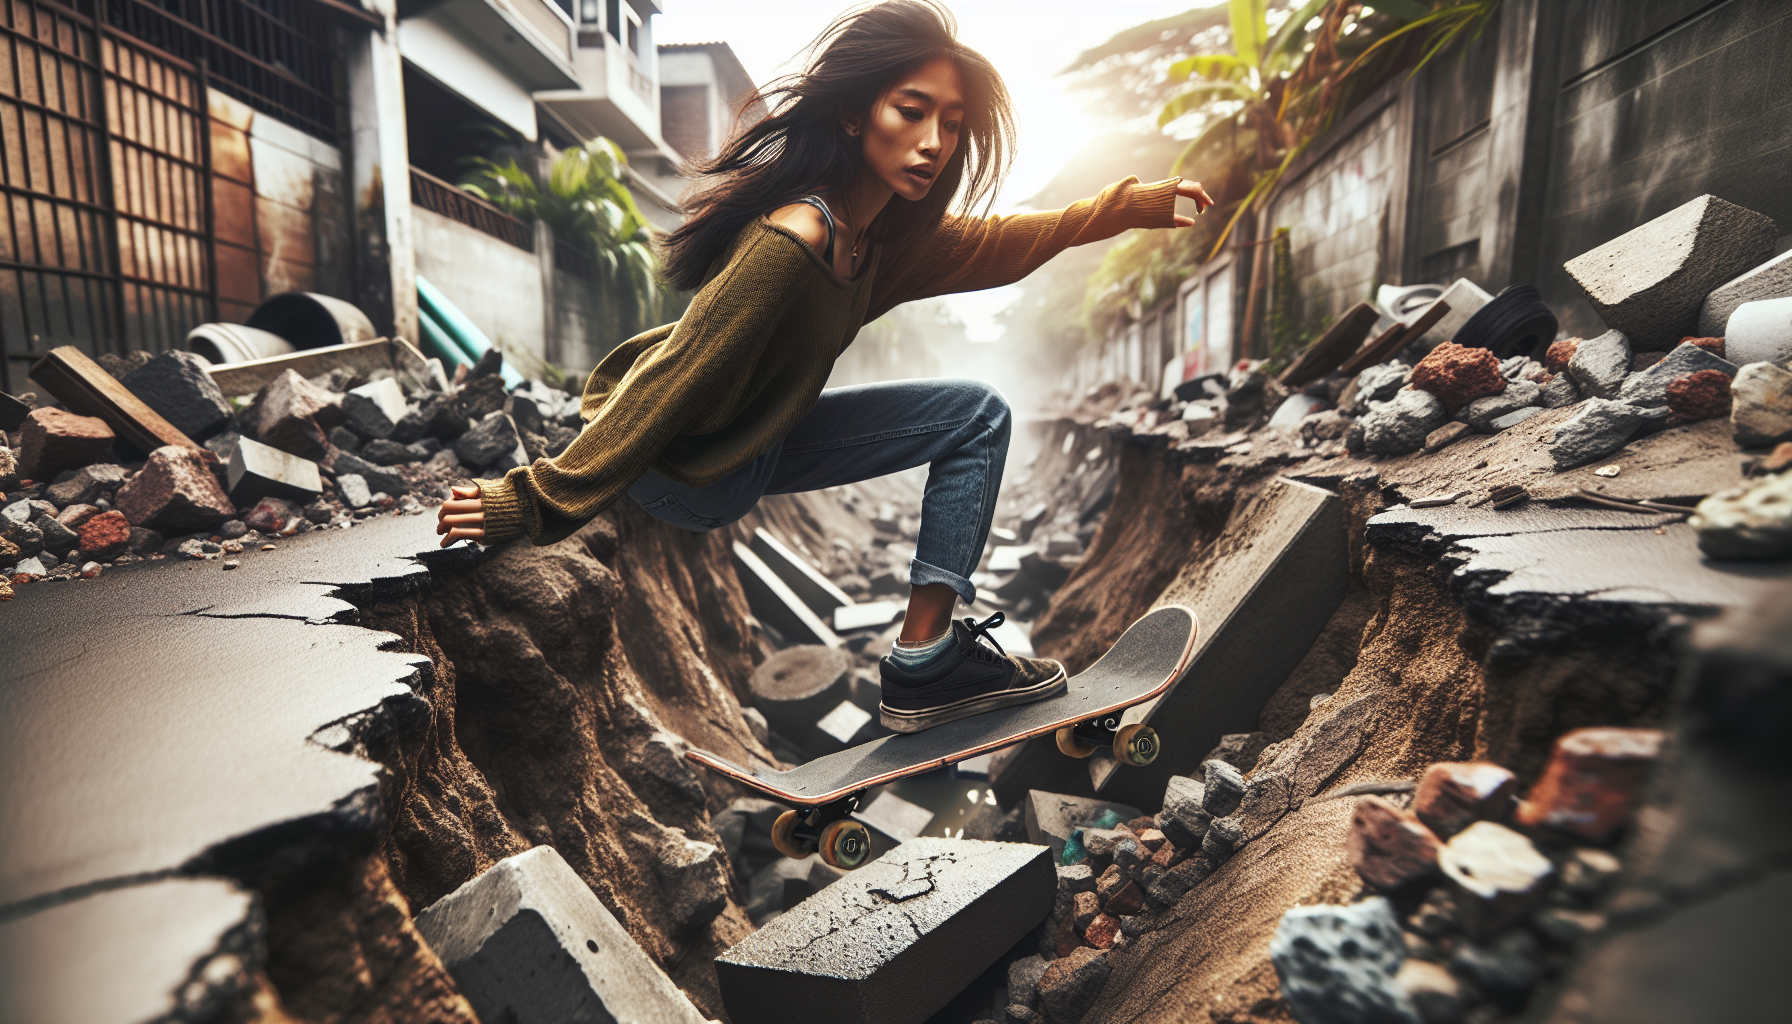 How Do You Handle The Challenges Of Skateboarding On Rough Or Uneven Surfaces?